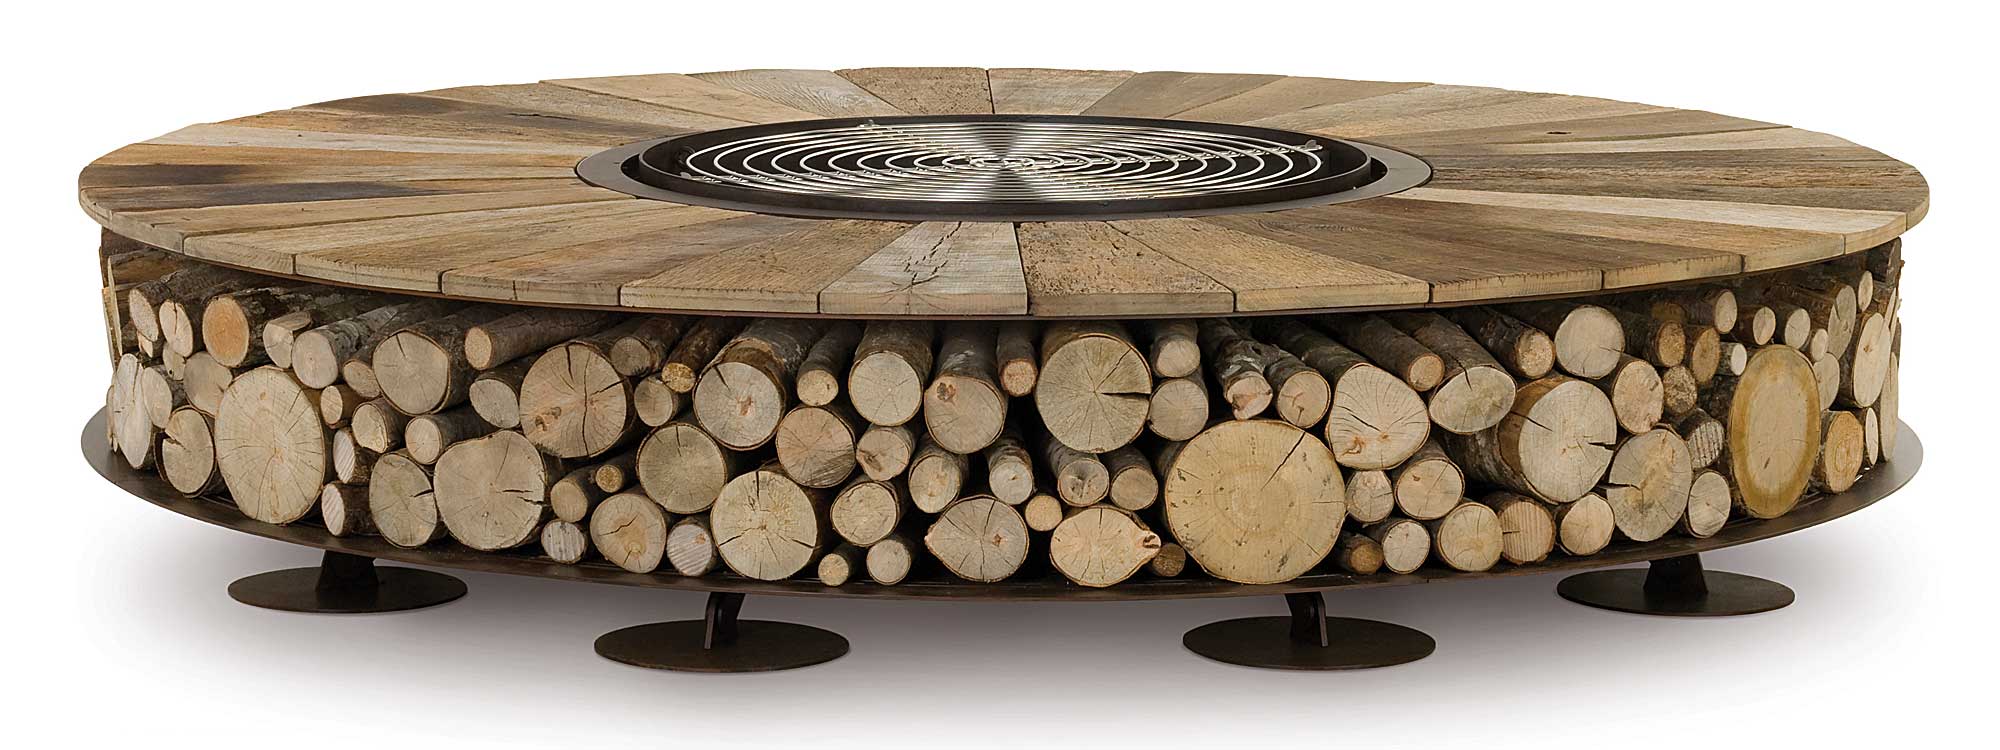 Studio Shot Of Zero WOOD FIRE PIT With Optional Stainless Steel BBQ Grill, Designed By Ivano Losa. Zero Wood MINIMALIST Outdoor Fireplace Is Avalailable In 3 Different Sizes Of 1.5, 2.0 & 3.0M Diametre. Zero Wood MODERN Garden Fire Pit Is Made In LUXURY Fire Pit MATERIALS By AK47 Fire Pits Company, Italy.